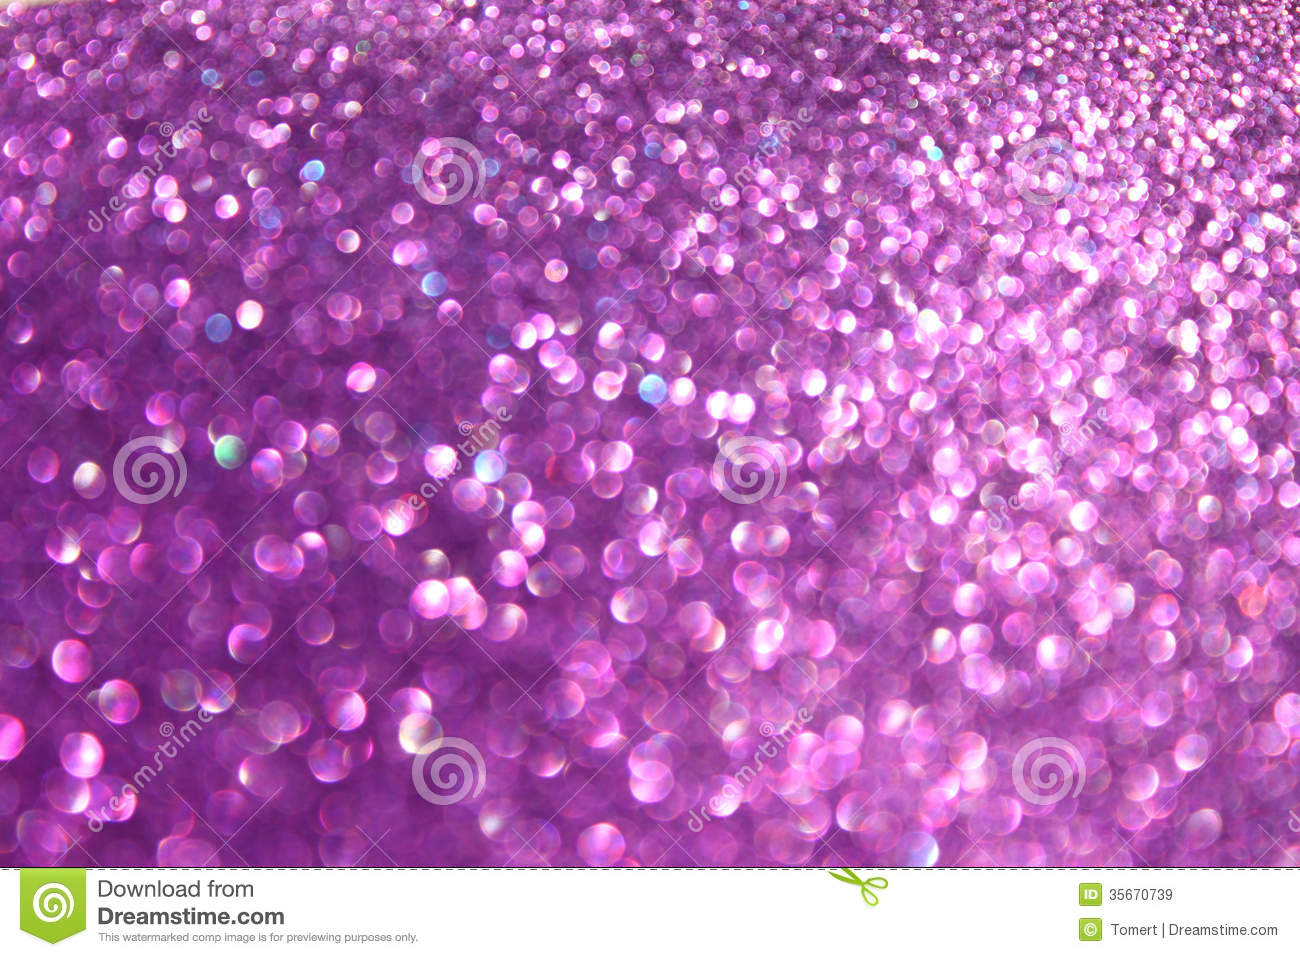 Purple Glitter Wallpaper   HD Wallpapers and Pictures 1300x957